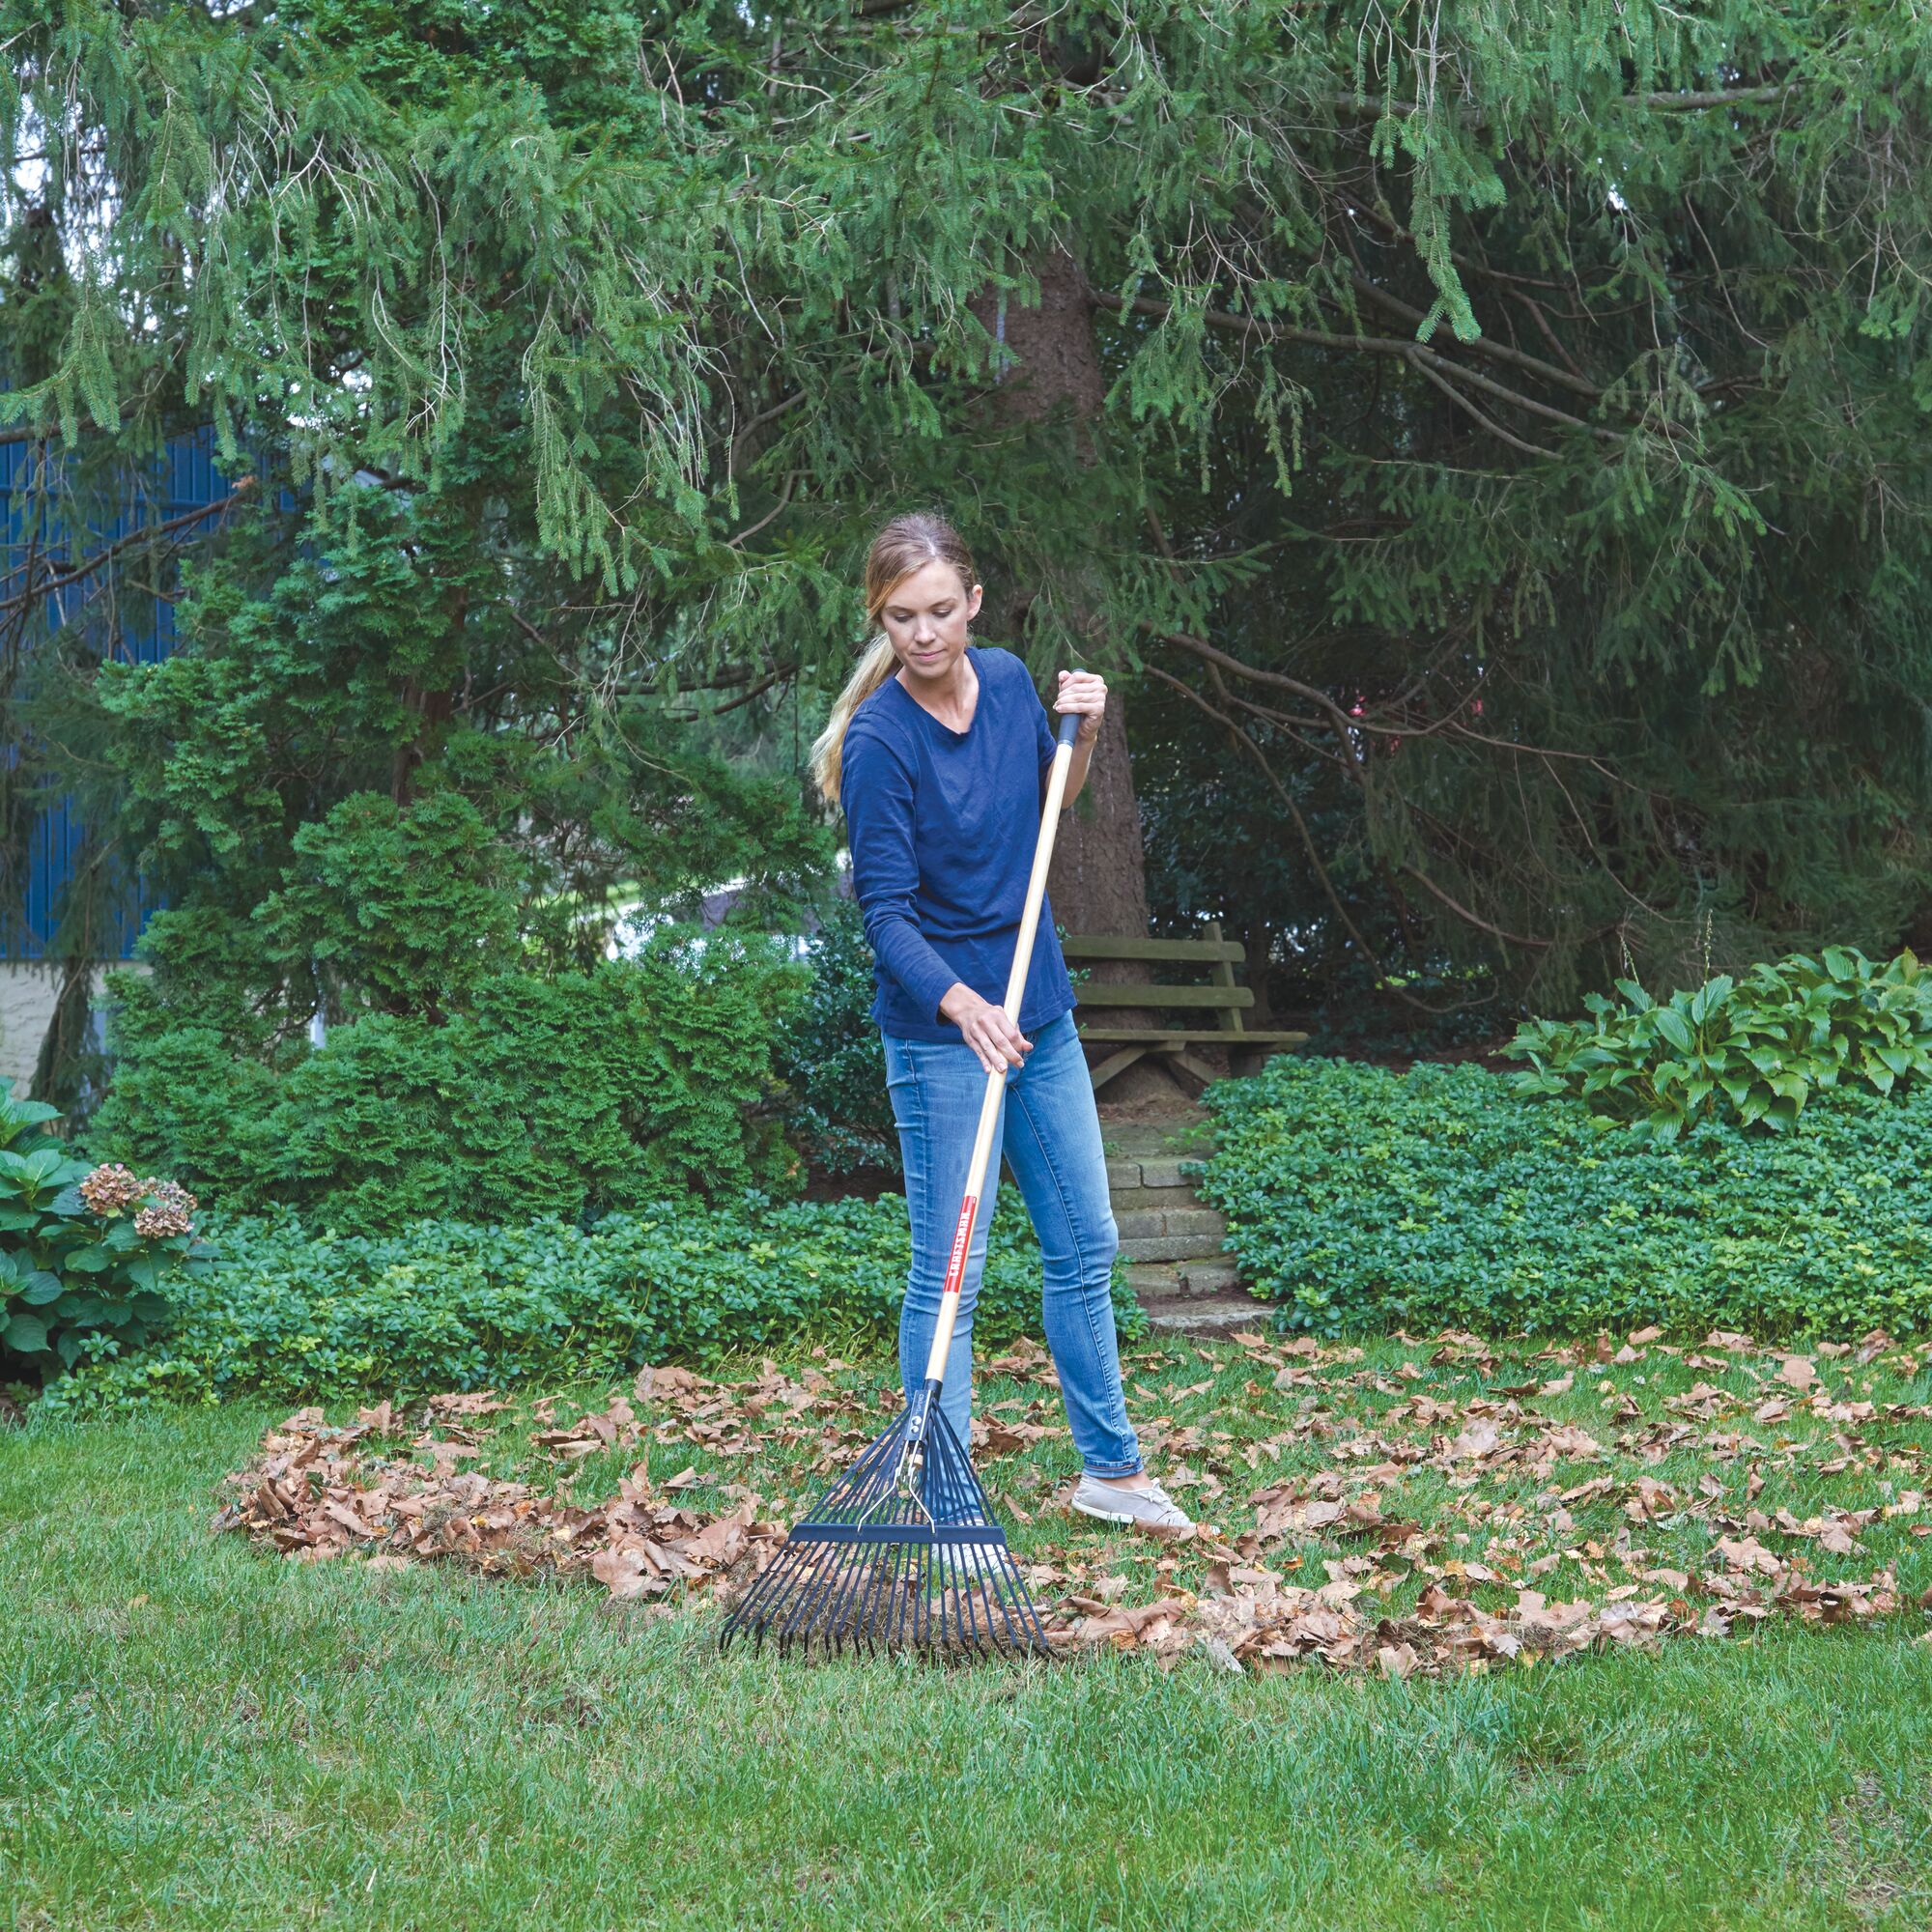 22 inch tine wood handle lawn rake being used by a person.